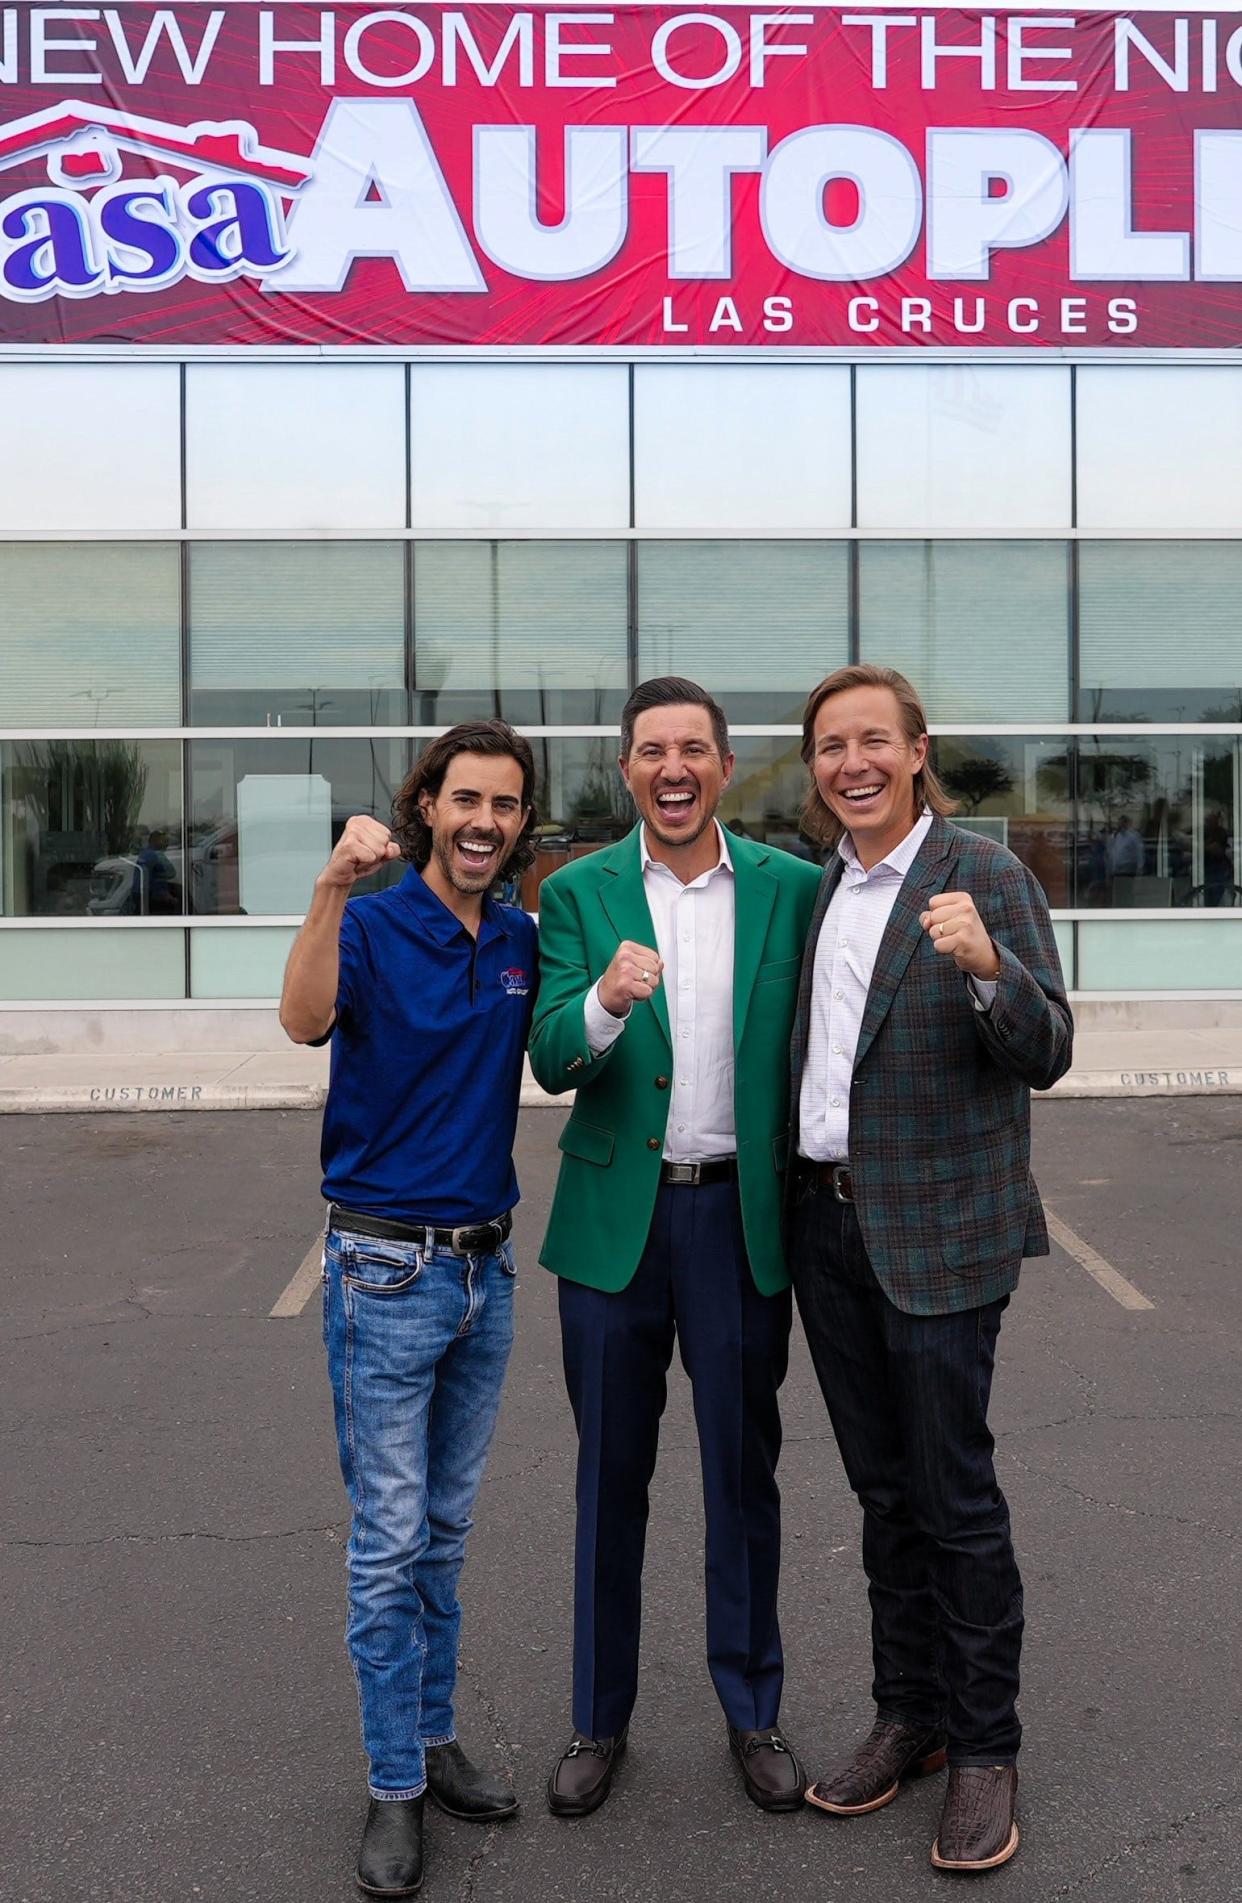 From left to right, Luke, Justin, and Ronnie Lowenfield outside the renamed Casa Autoplex in Las Cruces Sept. 20. The Lowenfields' Casa Auto Group recently bought the former Borman Autoplex.